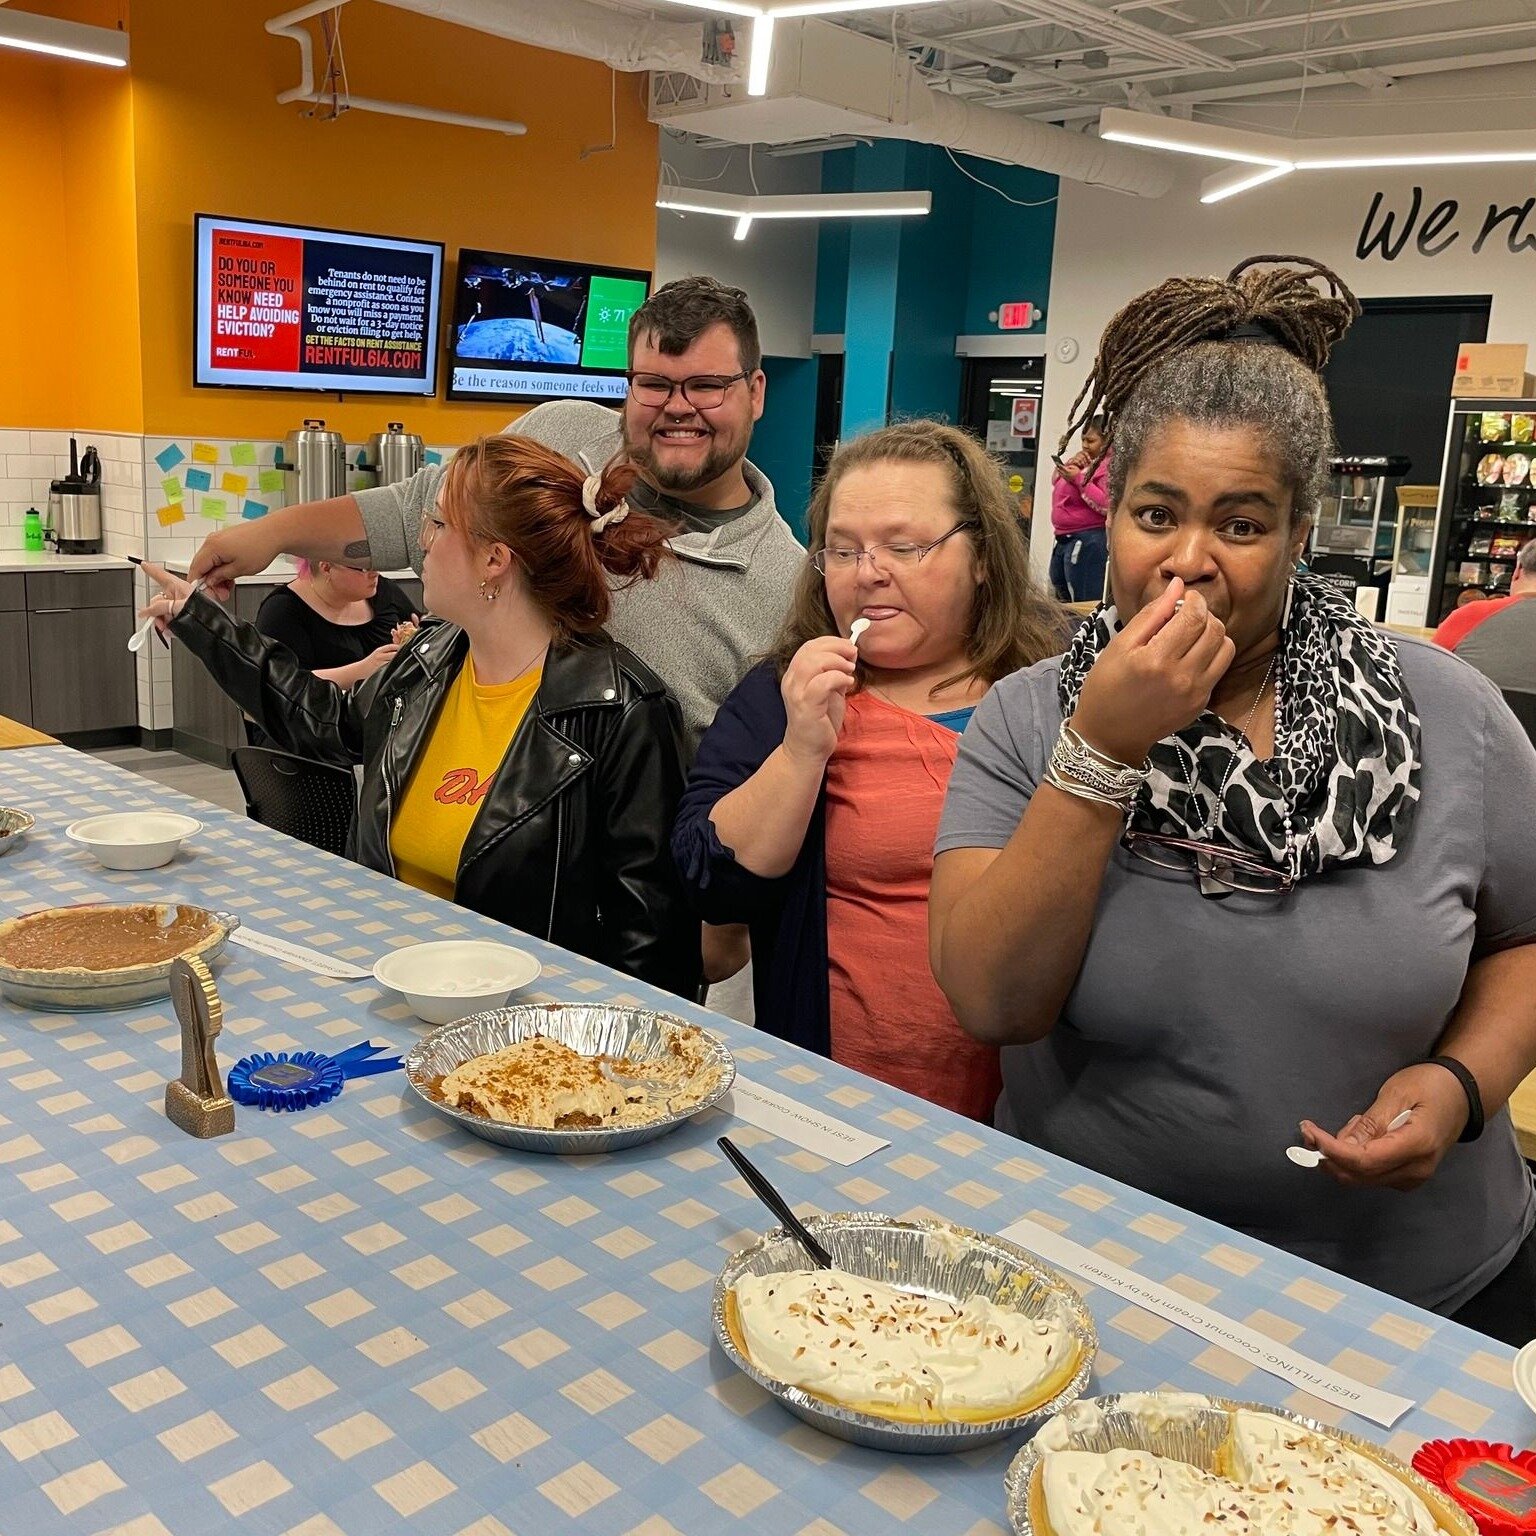 Happy Pi[e] Day, everyone!
Our Team at Fortuity celebrated the mathematic mastery that goes into pie baking today for our Pi[e] Day Bake Off! 

After careful deliberation from the judges, the following champions were revealed! 

BEST IN SHOW: Cookie 